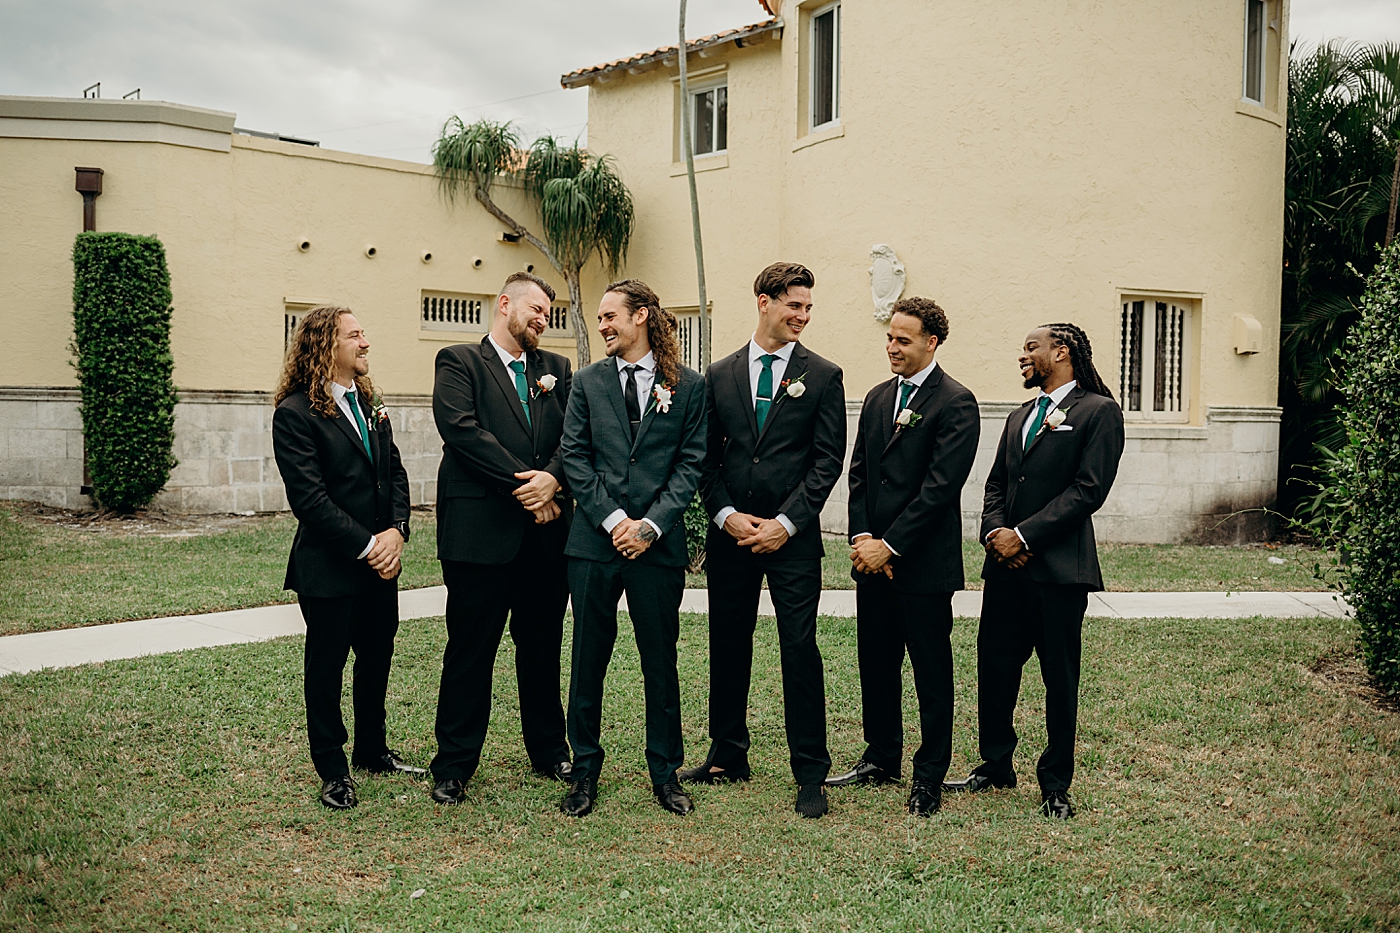 Groom and groomsmen with arms in formal position Benvenuto Restaurant Wedding Photography captured by South Florida Wedding Photographer Maggie Alvarez Photography